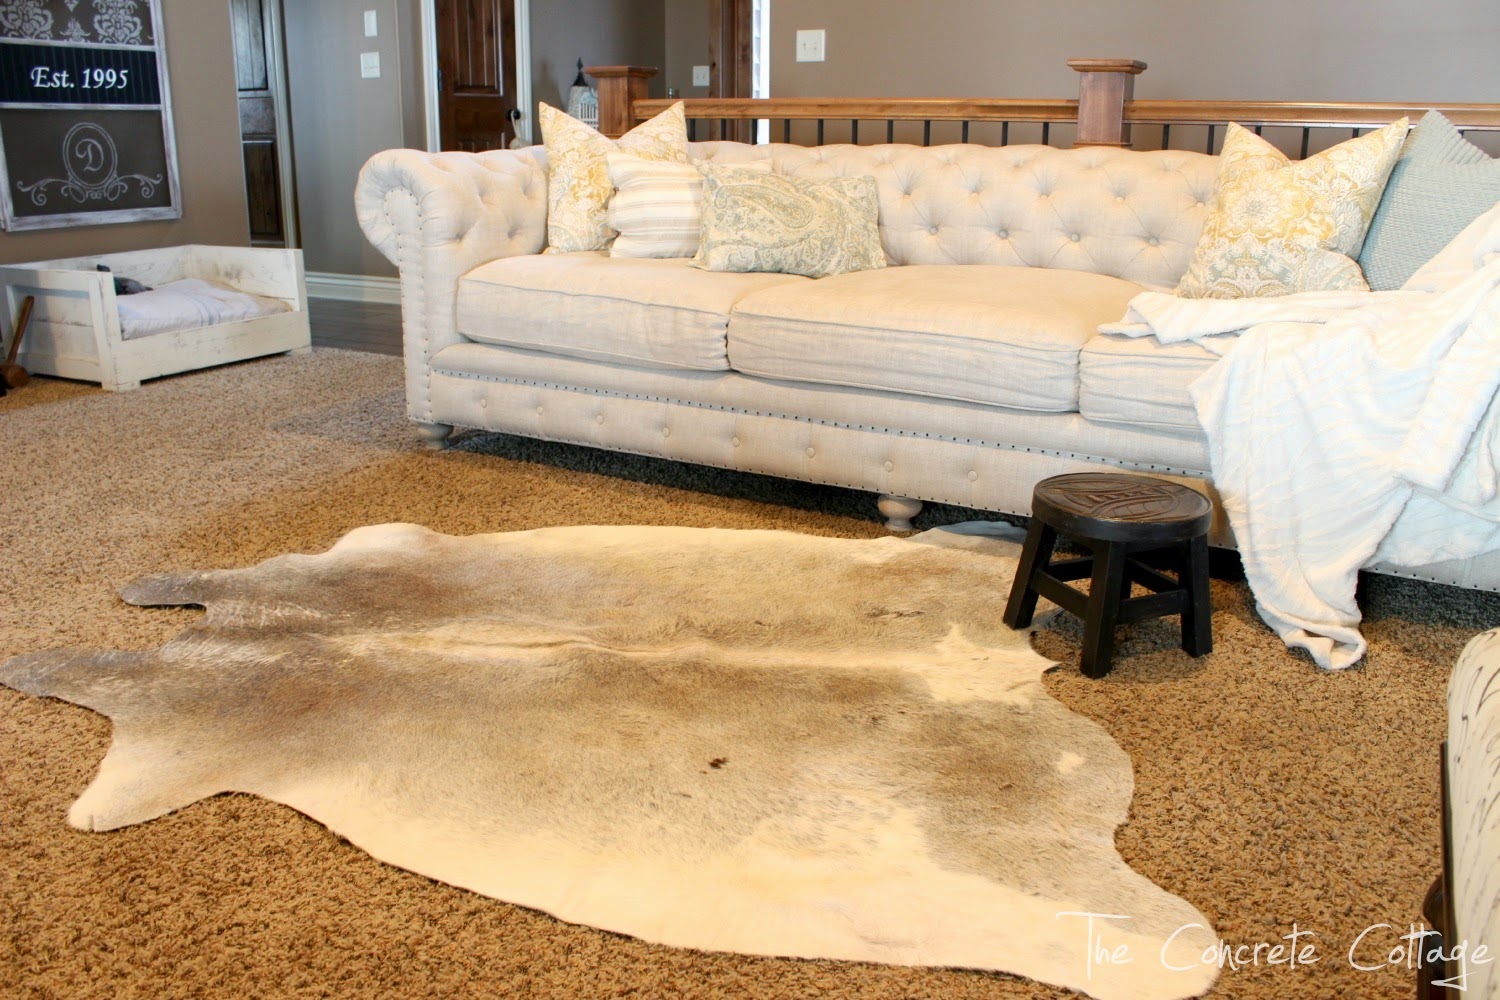 Removing Wrinkles From A Cowhide Rug, Crate And Barrel Cowhide Rug